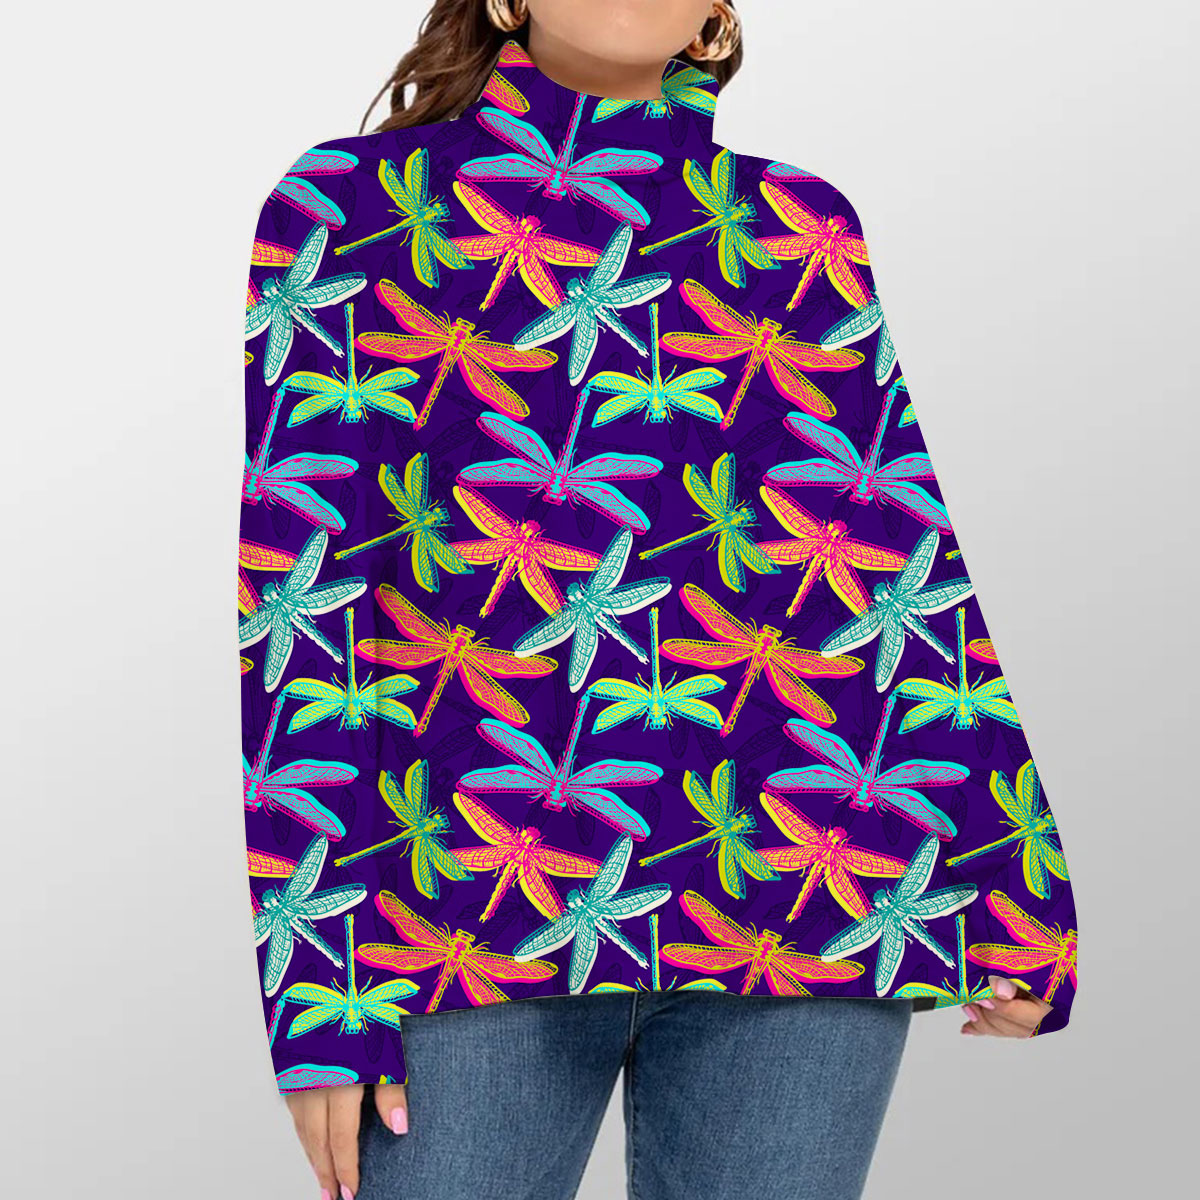 Neon Color Dragonfly Turtleneck Sweater